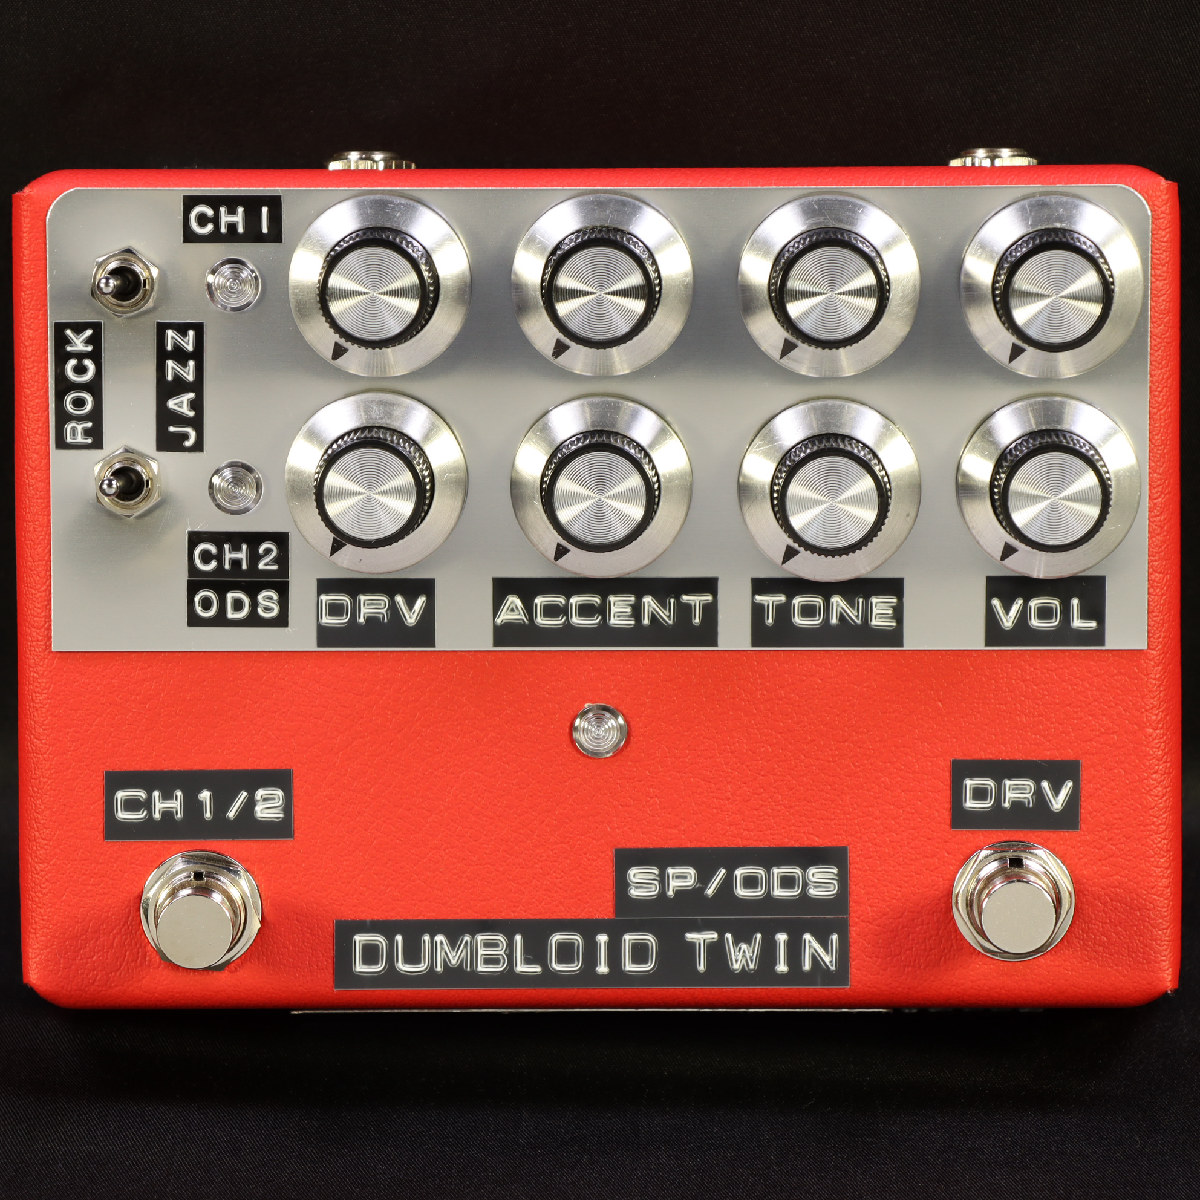 Shins Music / Dumbloid Twin SP/ODS Red Tolex with Jazz/Rock SW シンズミュージック  オーバードライブ